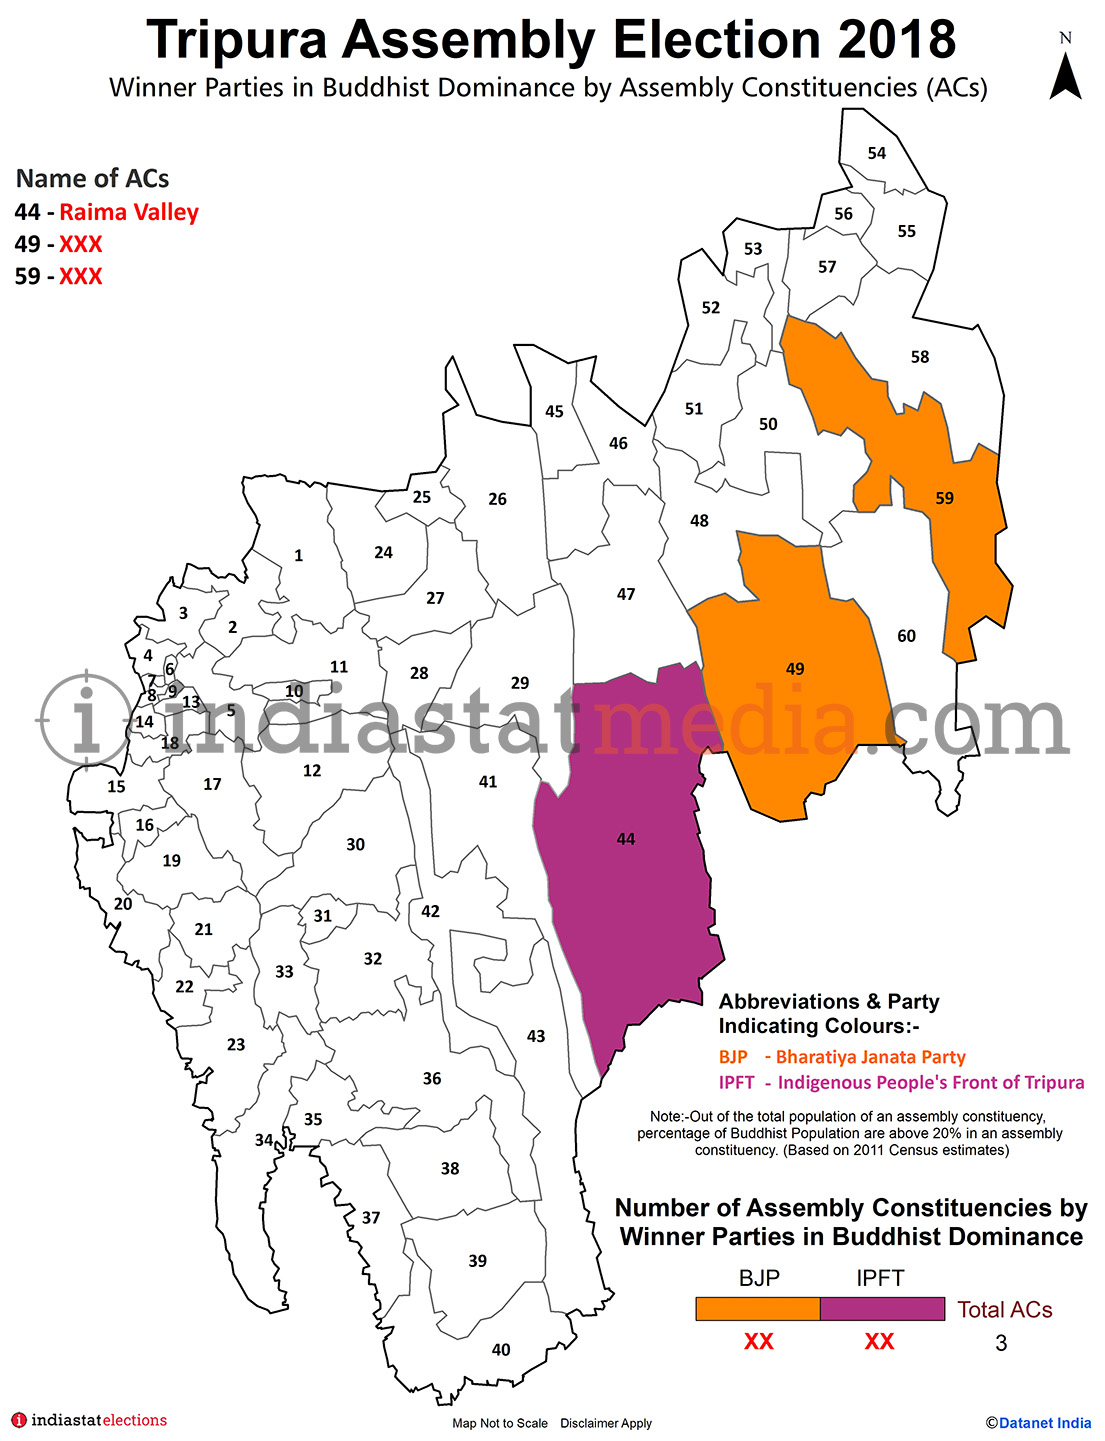 Winner Parties in Buddhist Dominance by Constituencies in Tripura (Assembly Election - 2018)